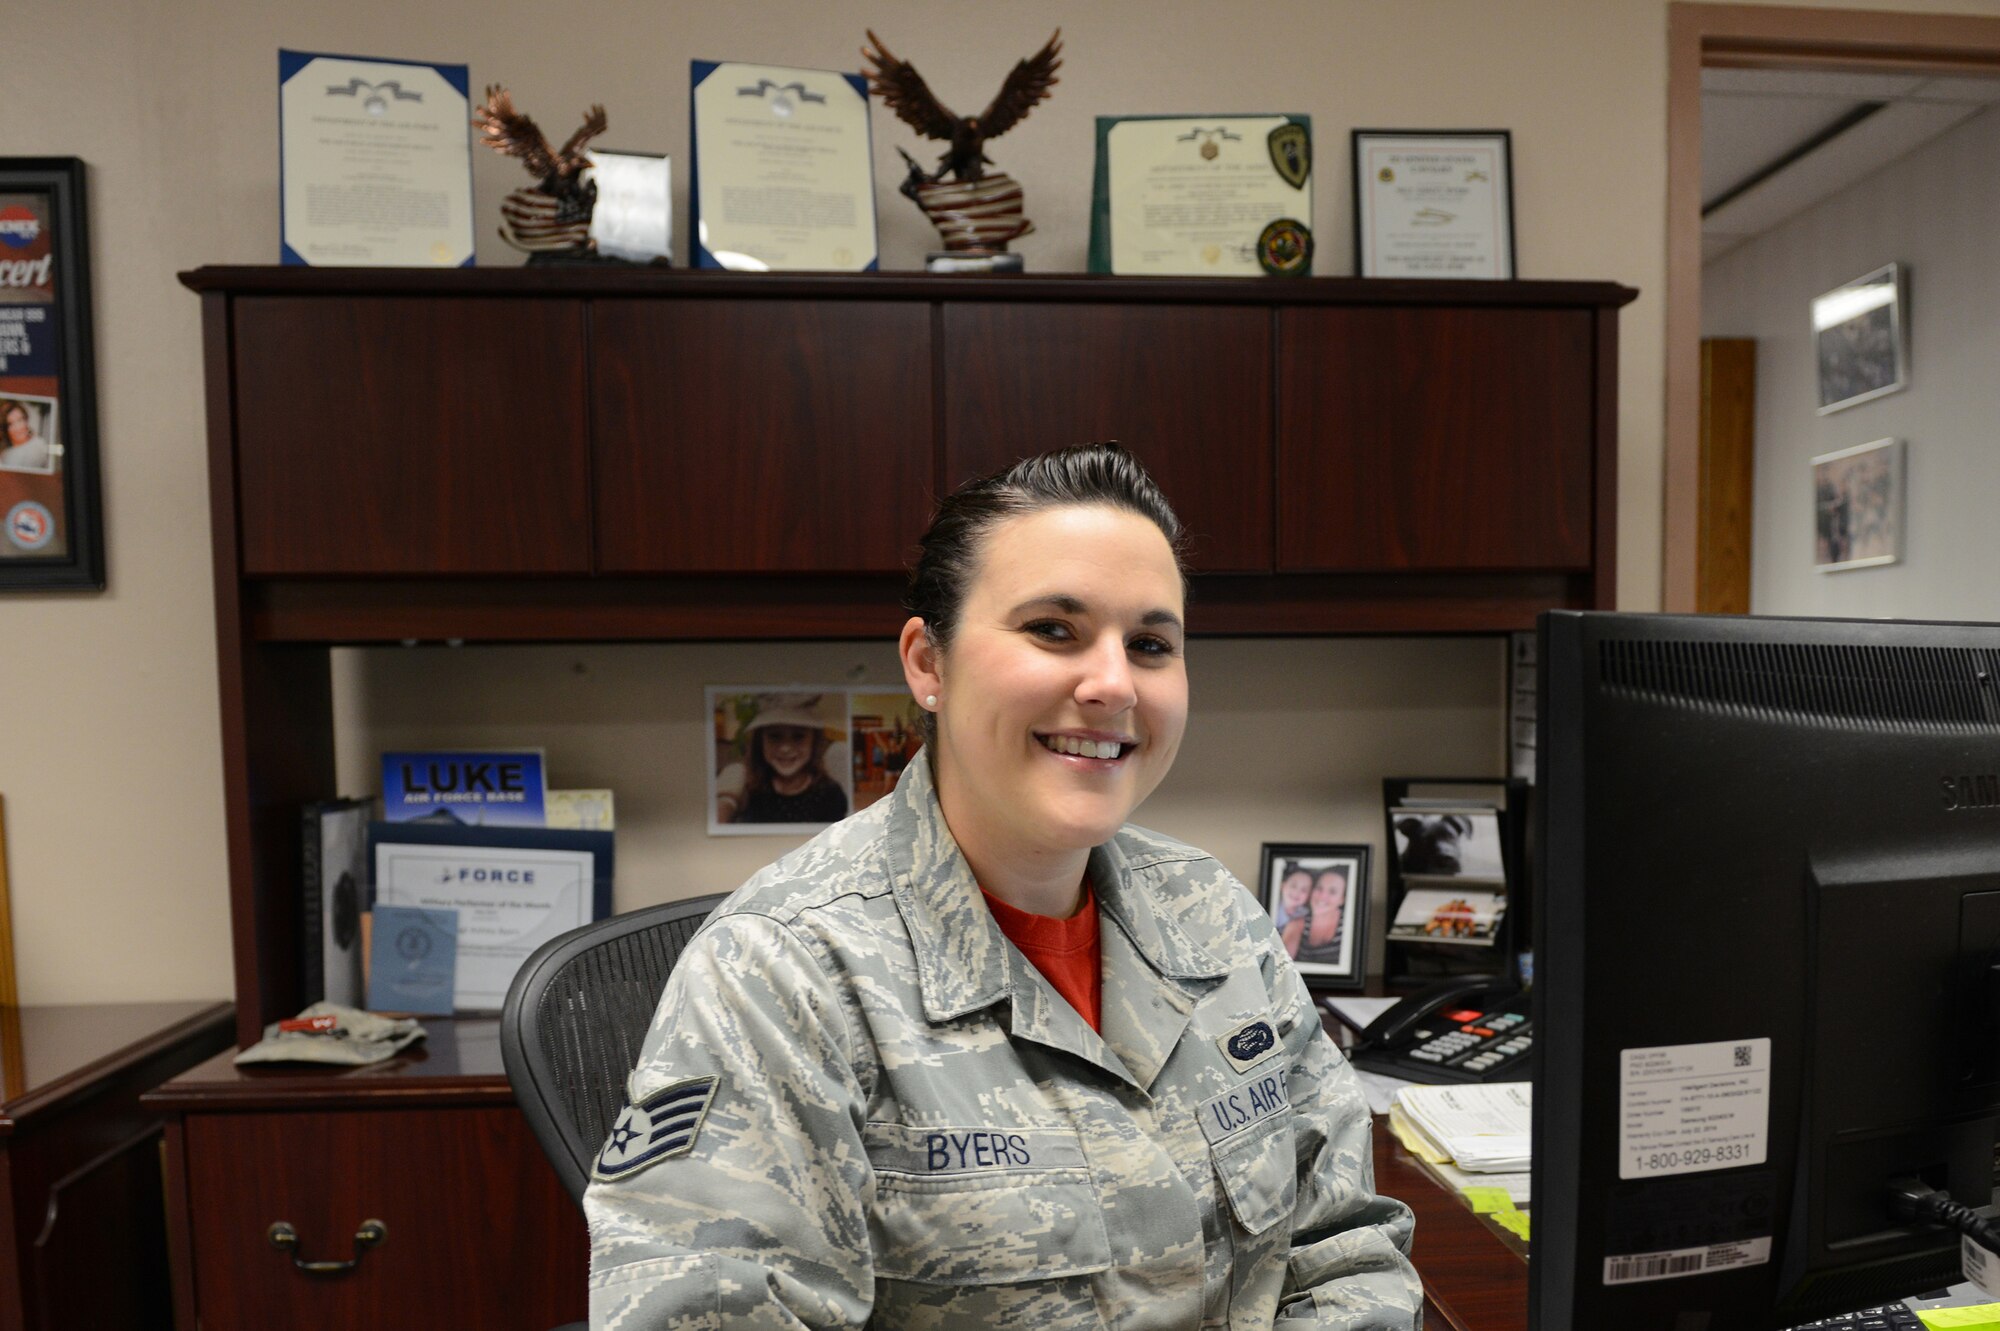 Staff Sgt. Ashley Byers, 56th Force Support Squadron NCO in charge commanders support staff, sits at her desk at Luke Air Force Base, Arizona, Oct. 16, 2015. Byers assists the 56th FSS commander in their objectives on a daily basis. (U.S. Air Force photo by Senior Airman James Hensley)